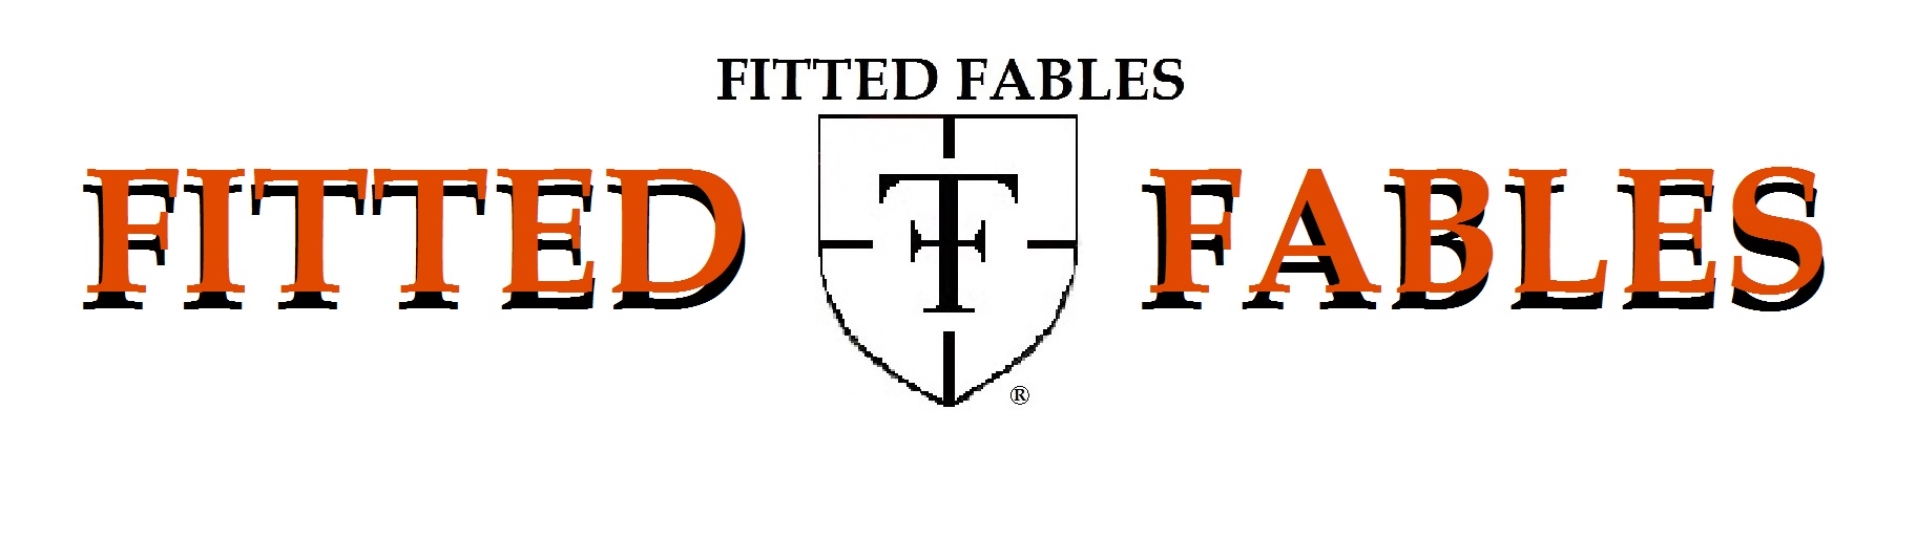 FITTED FABLES